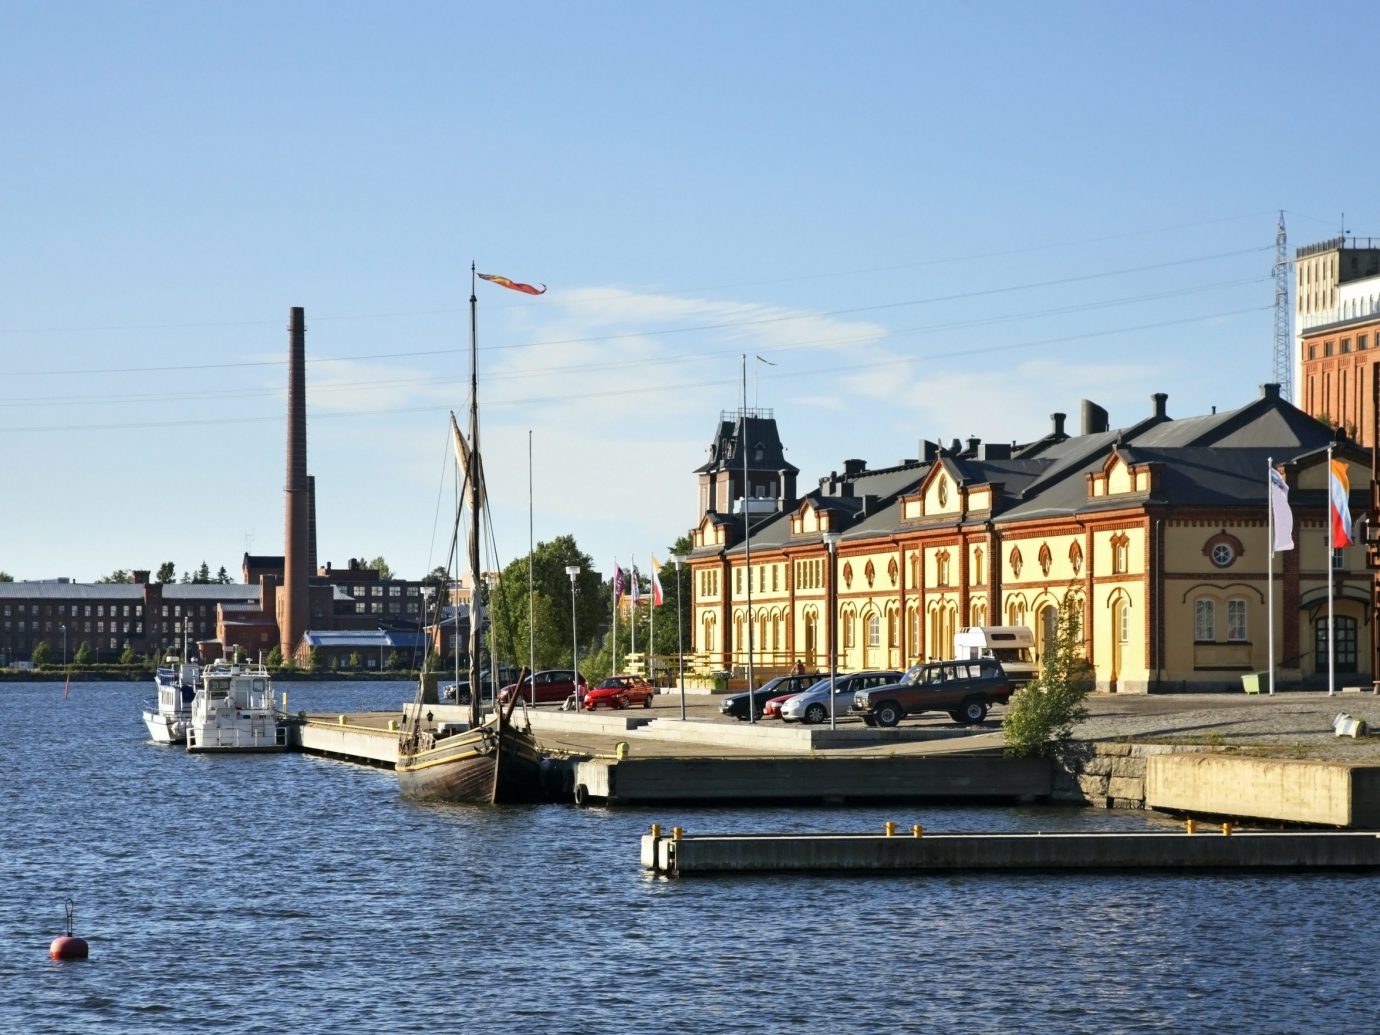 Finland Trip Ideas sky water outdoor waterway body of water Boat Harbor water transportation Town Canal channel vehicle River City boating watercraft marina tree port ship house day